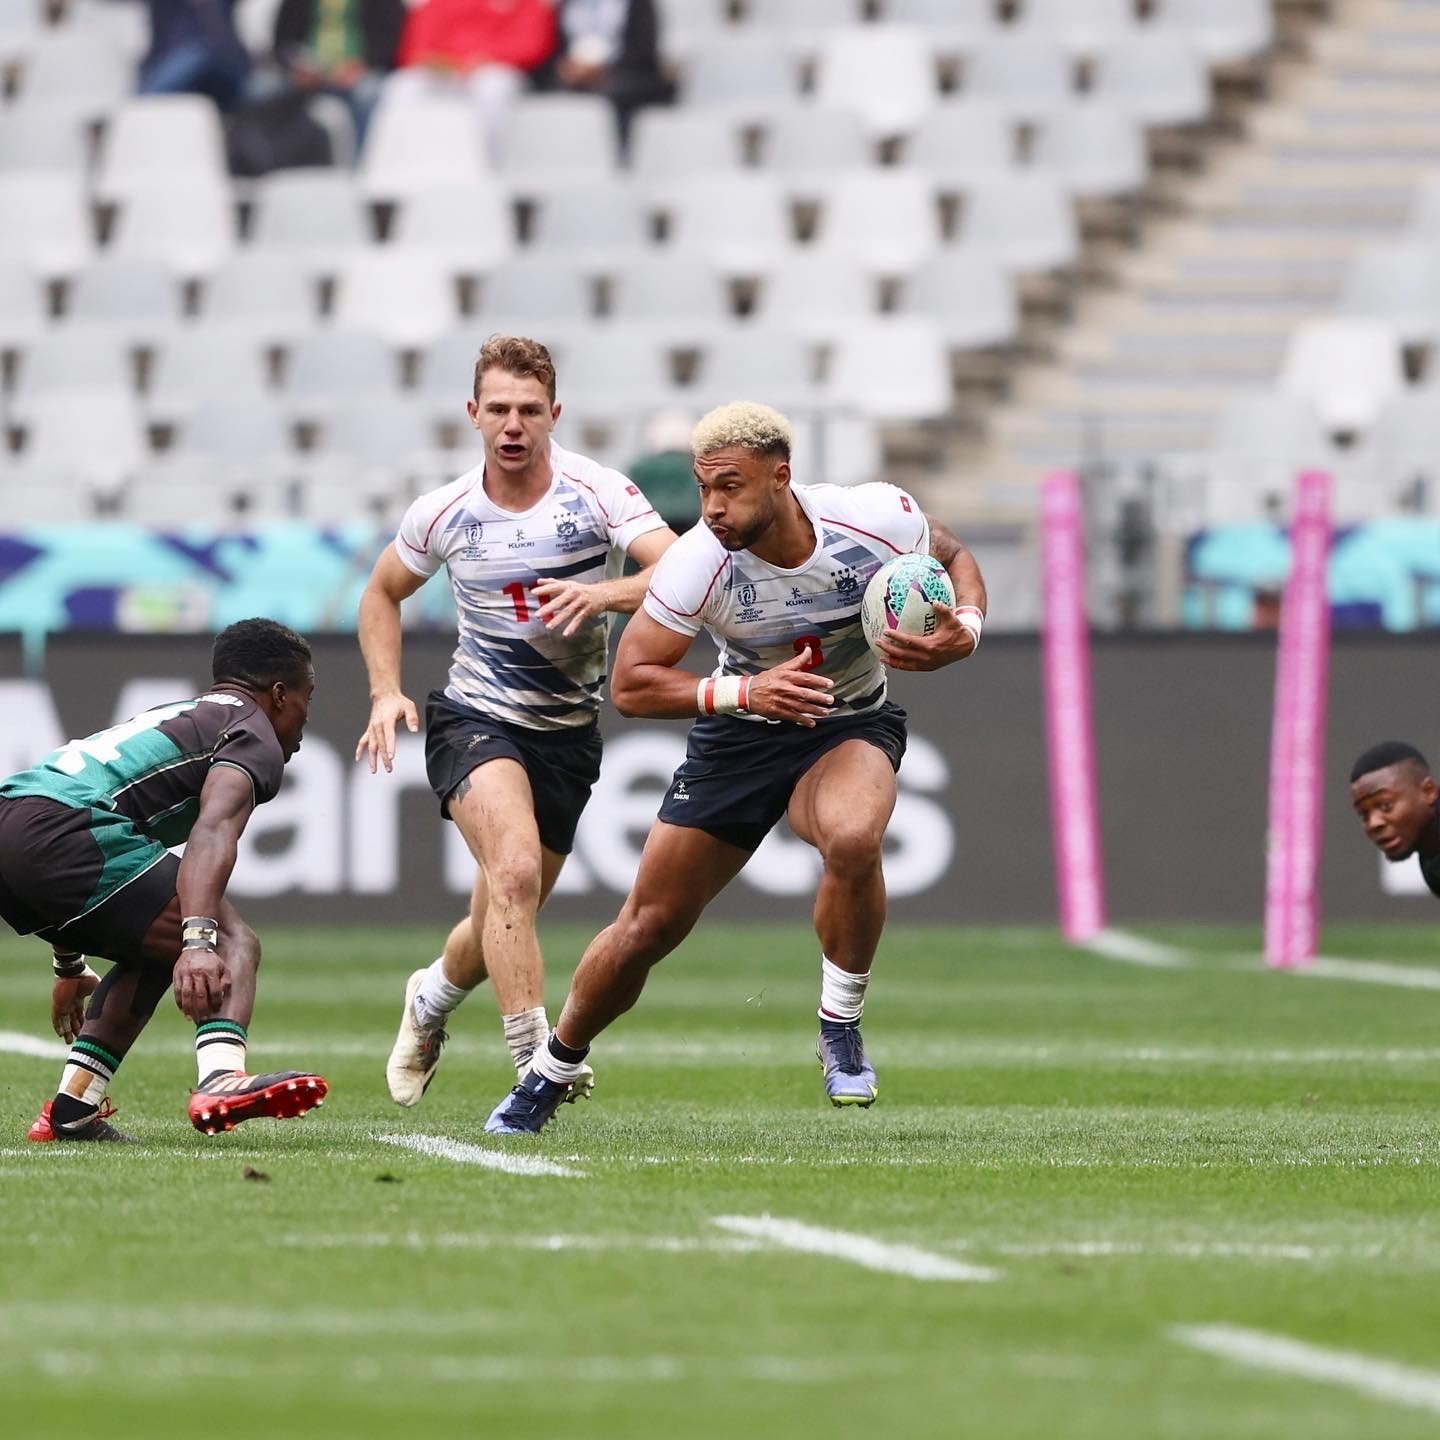 Max Denmark takes on the Zimbabwe defence at the Rugby World Cup Sevens. Photo: Handout